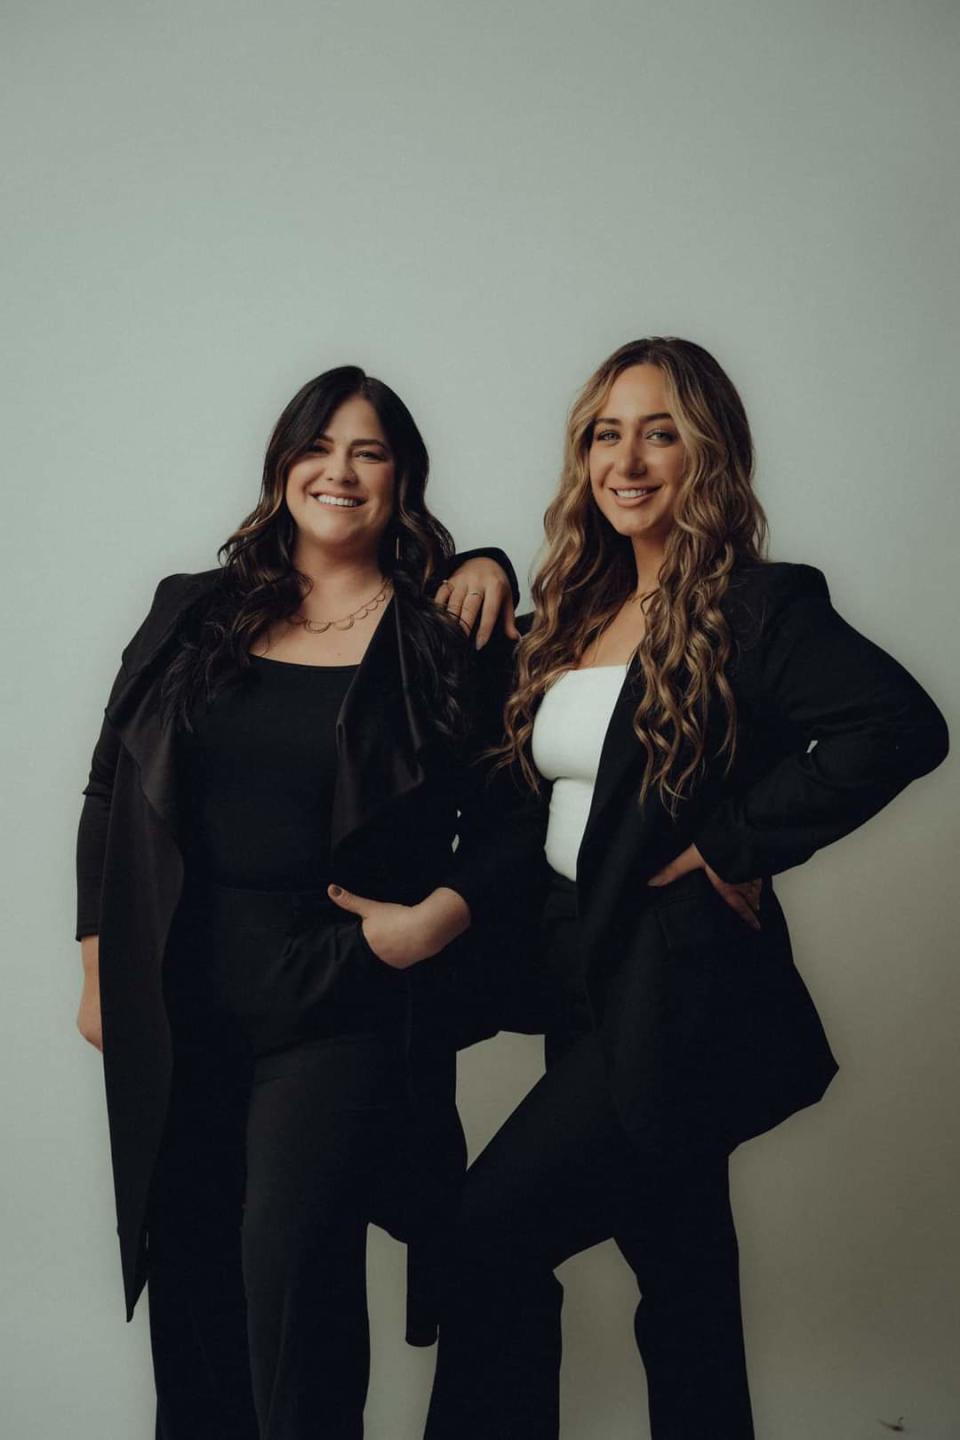 Brittany Rayburn and Desiree Nidiffer, both registered nurses, have founded Agape United Home Care LLC, and said they are poised to transform the landscape of in-home care in the local area.